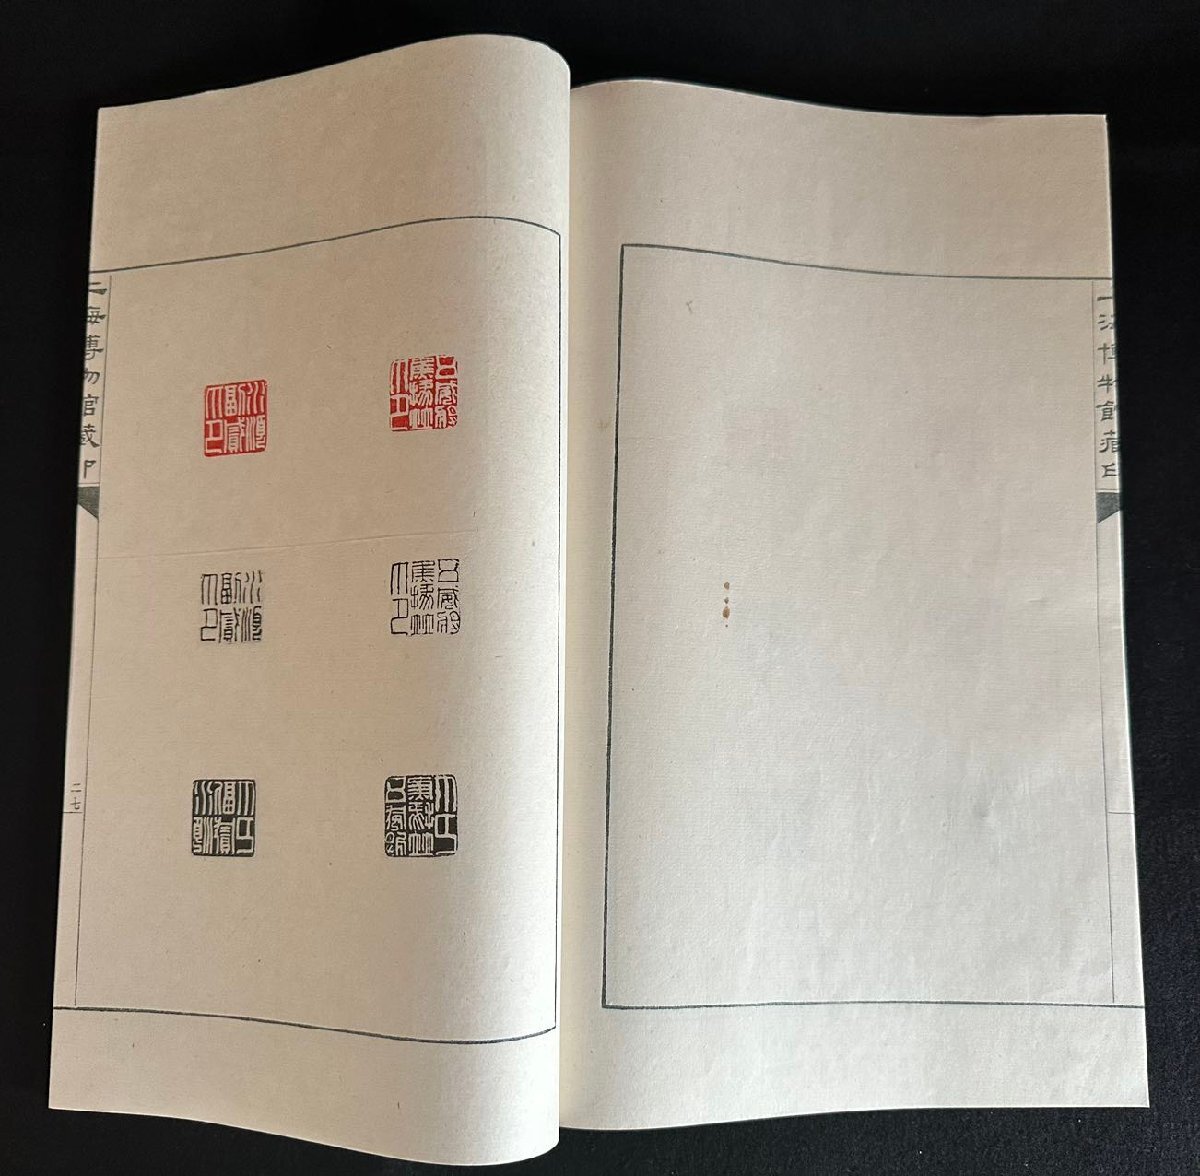 ch0 1 pcs publication China on sea museum warehouse seal seal . seal . compilation 12 pcs. set collection old thing 